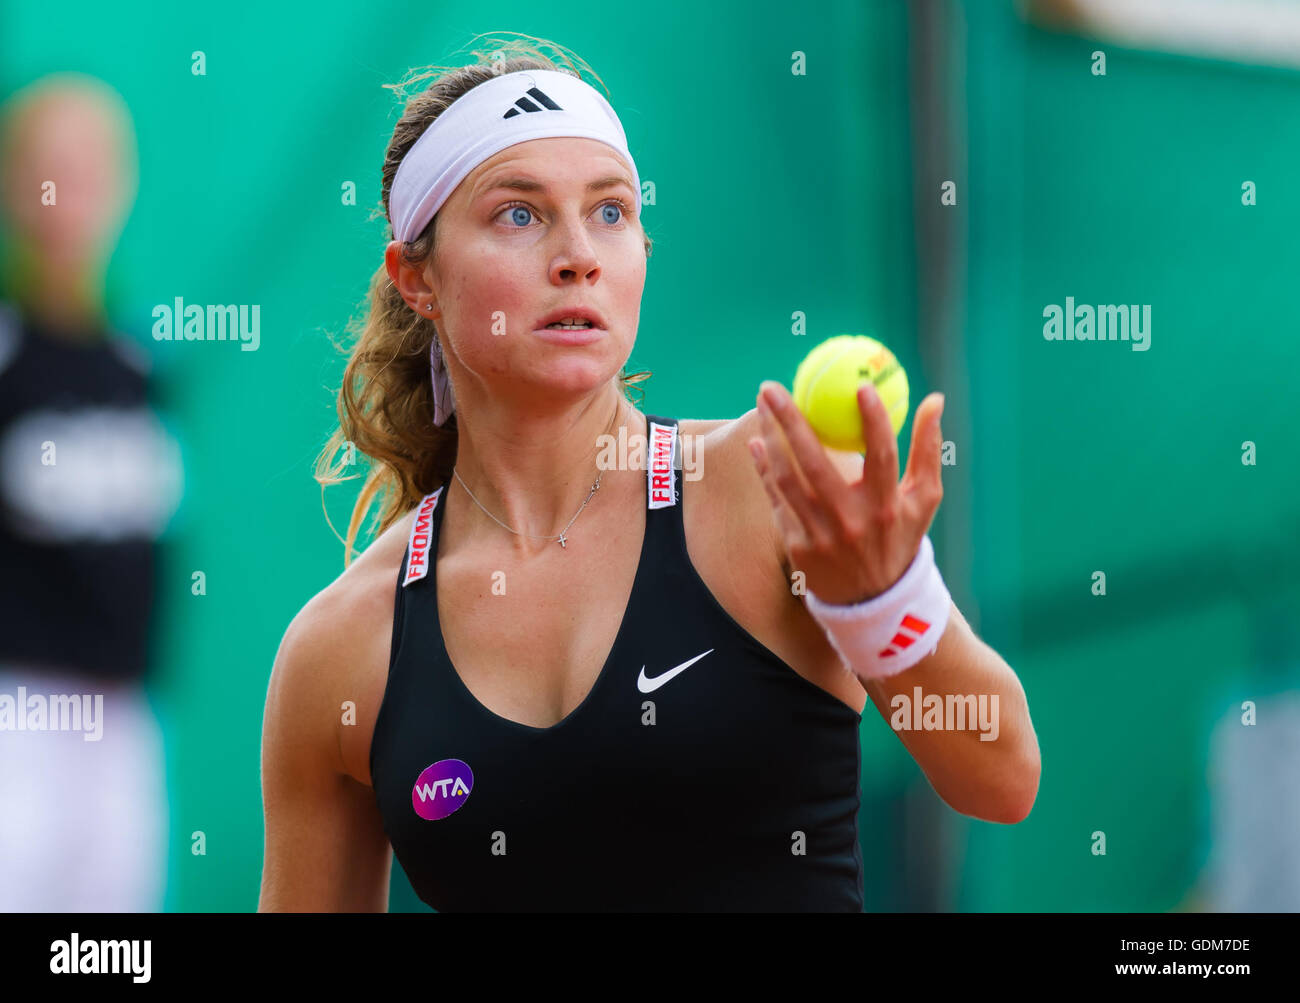 Bastad, Sweden. 18 July, 2016. Stefanie Voegele in action at the 2016 Ericsson Open WTA International tennis tournament Credit:  Jimmie48 Photography/Alamy Live News Stock Photo